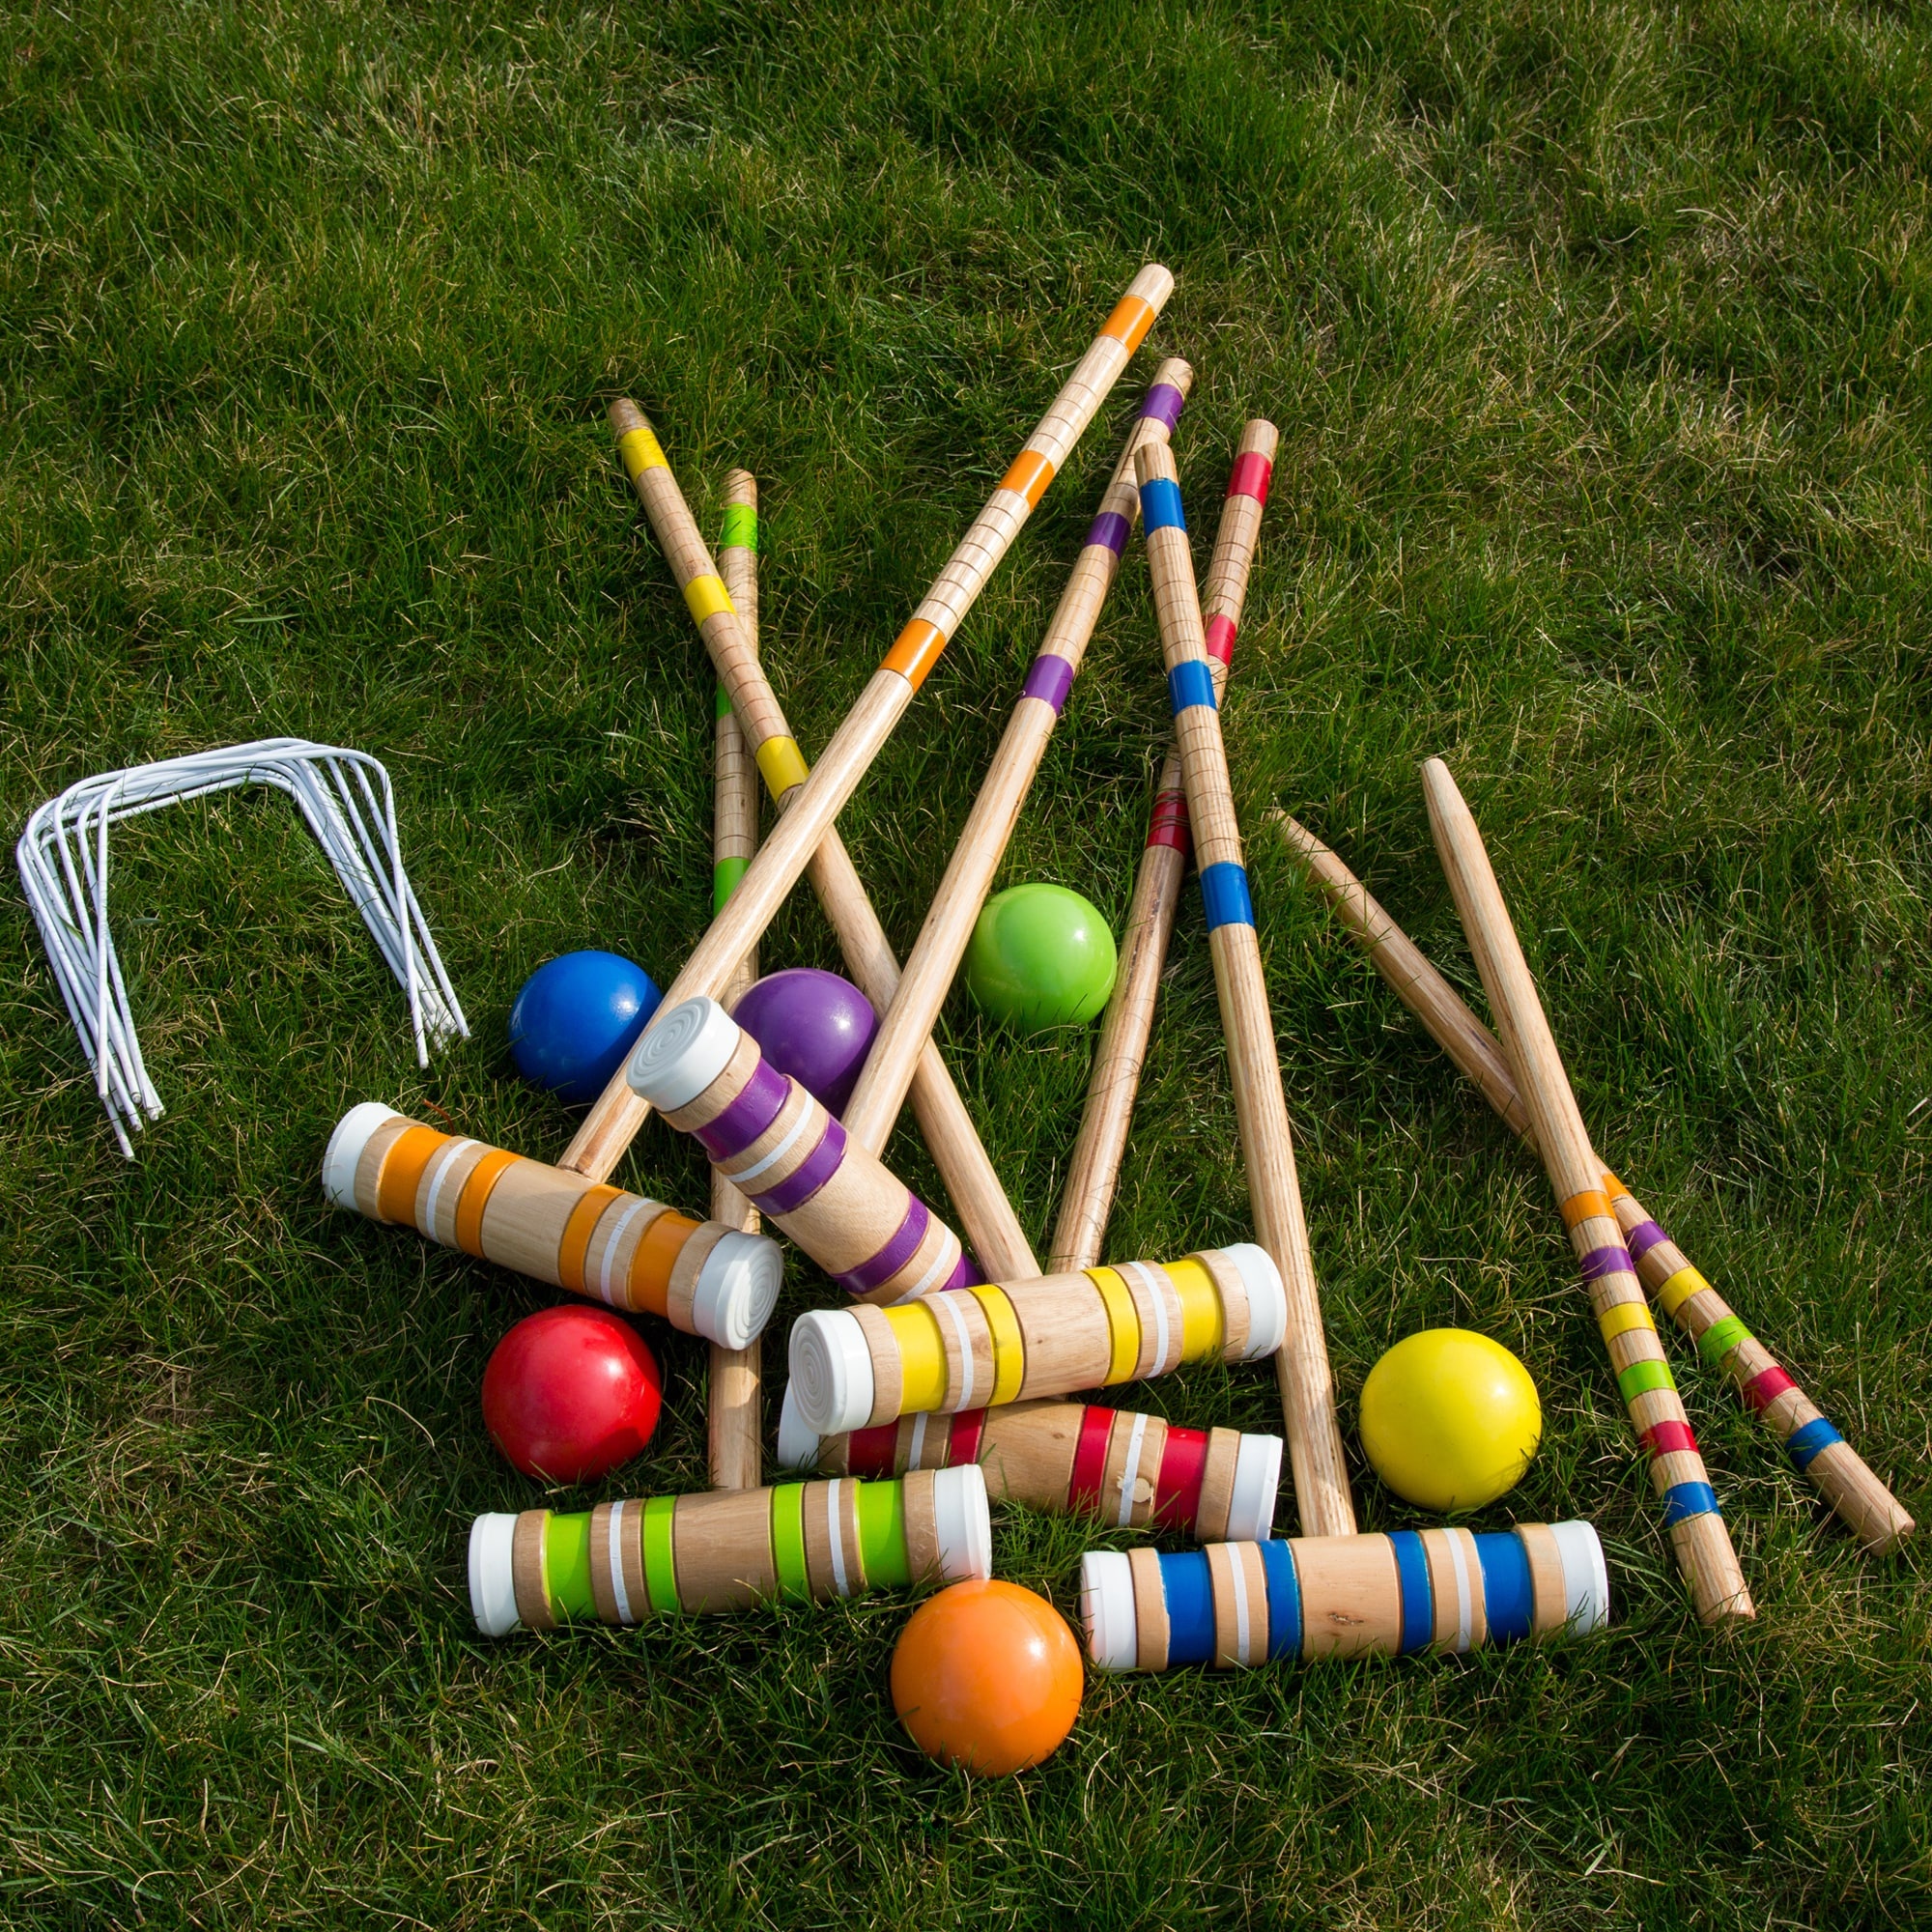 Croquet: Complete Game Set, 6 clubs and 6 balls of different colors with 6 hoops. 2000x2000 HD Background.